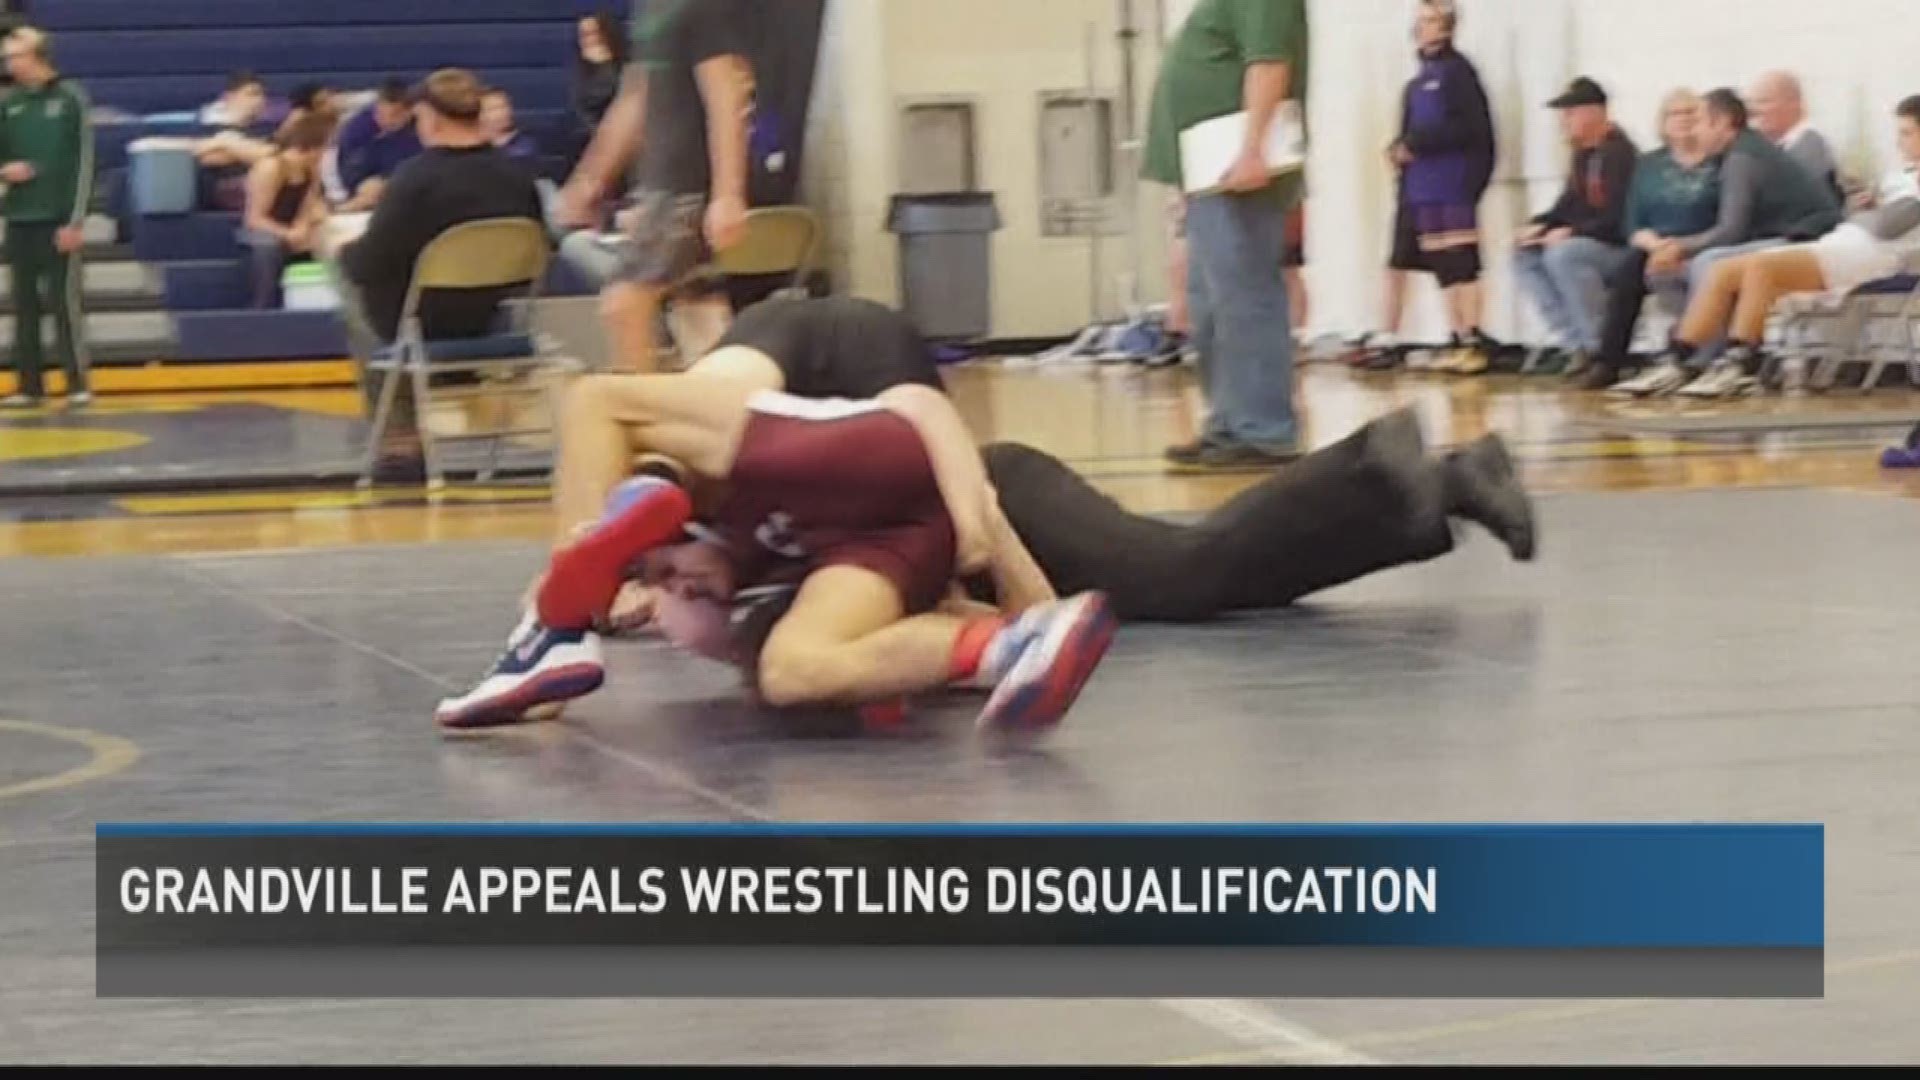 The school was disqualified for participating in one too many wrestling meets.